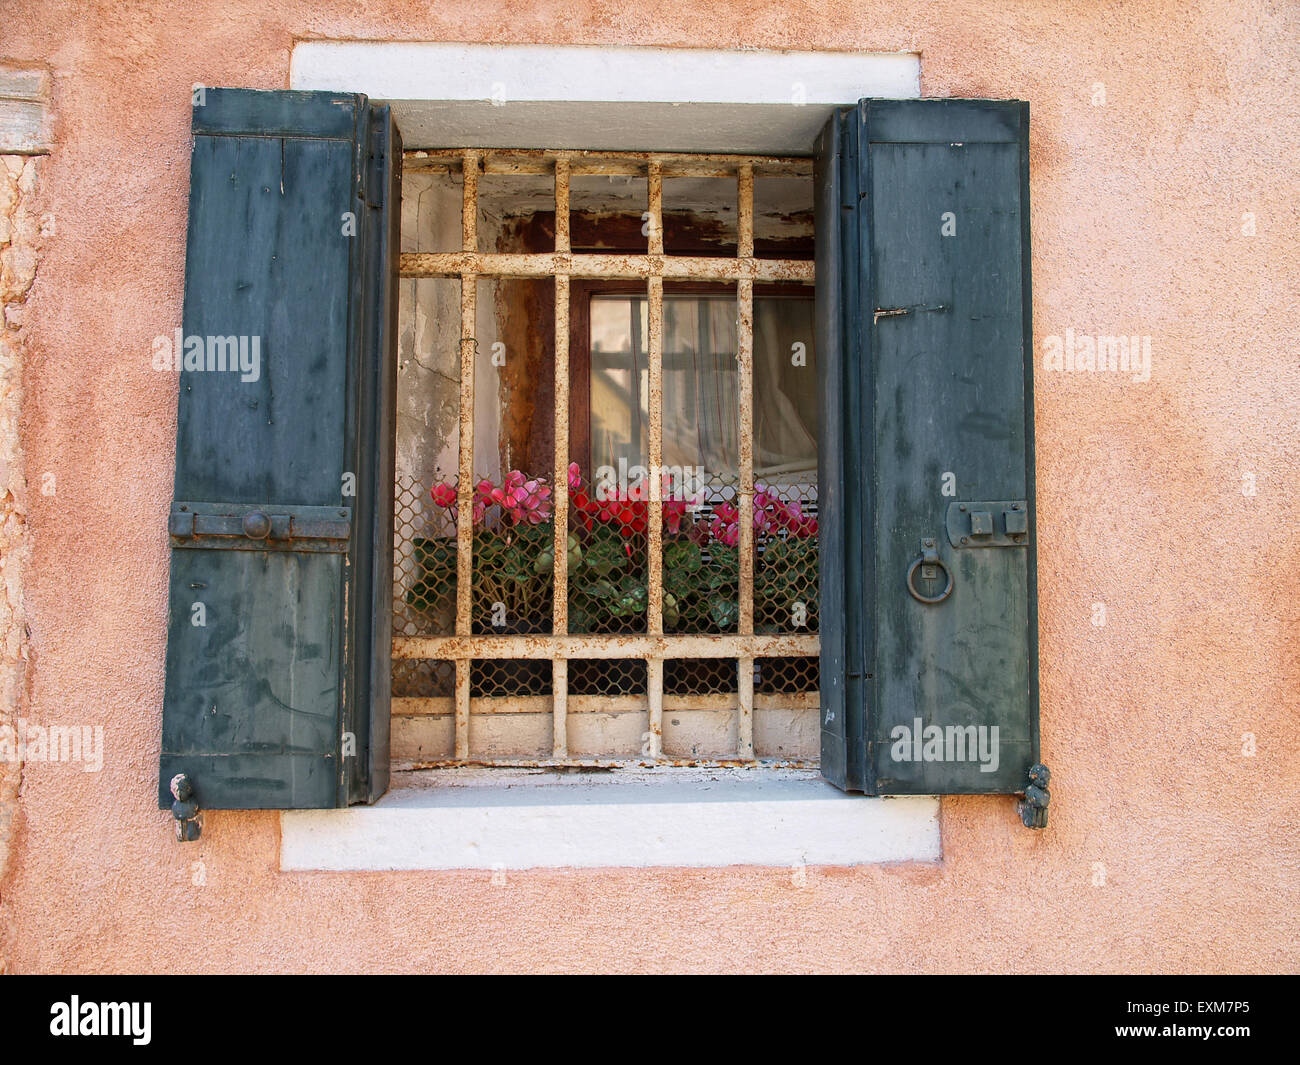 View of a latticed window with green shutters in a old building. Venice. Italy. Stock Photo